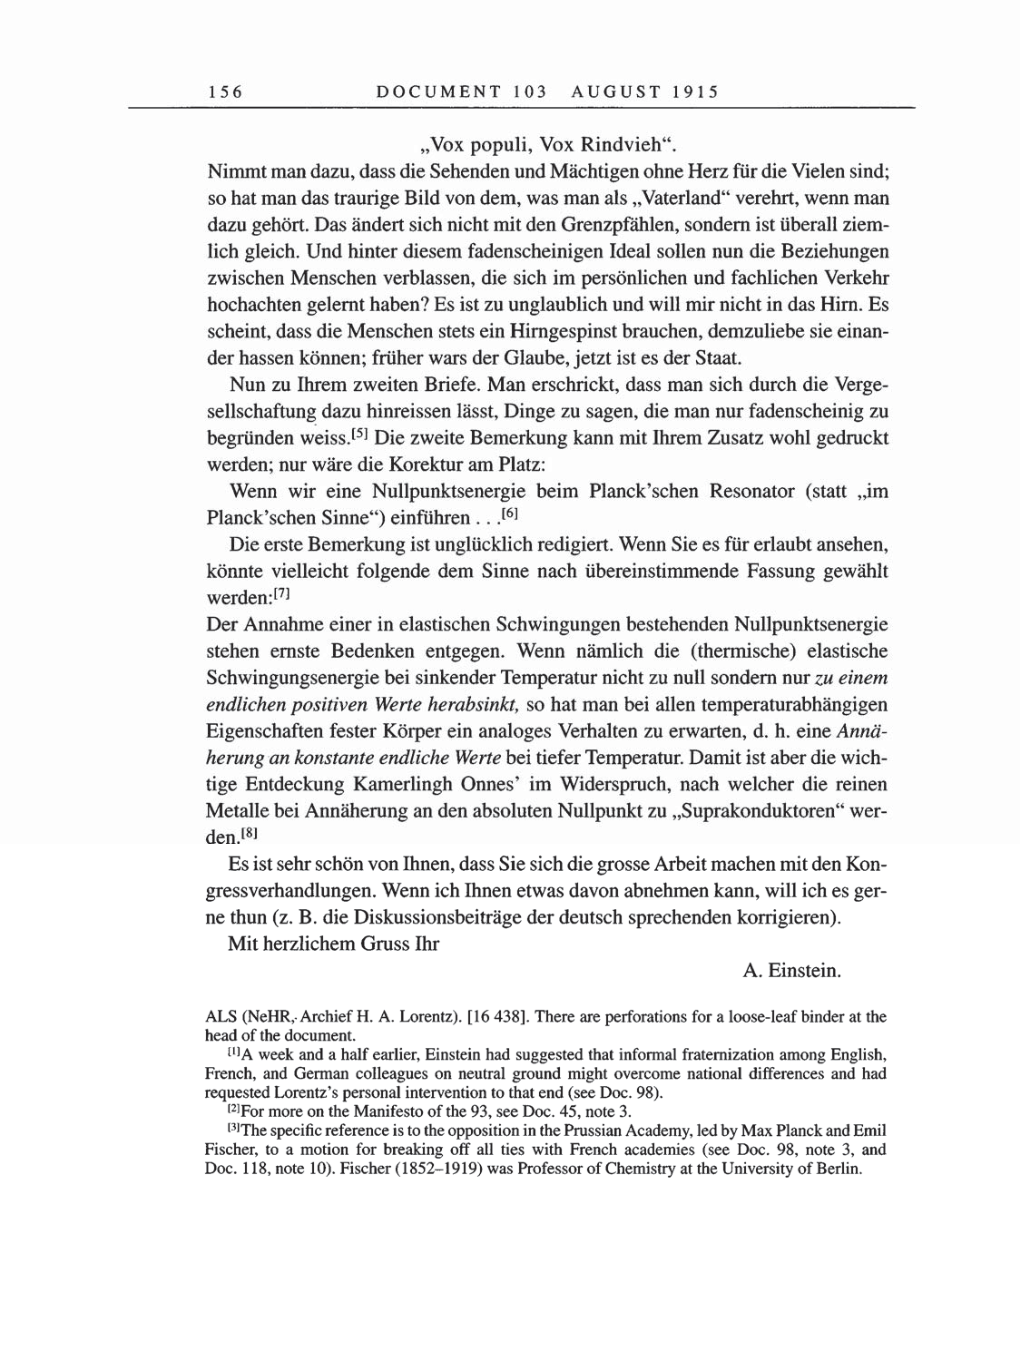 Volume 8, Part A: The Berlin Years: Correspondence 1914-1917 page 156